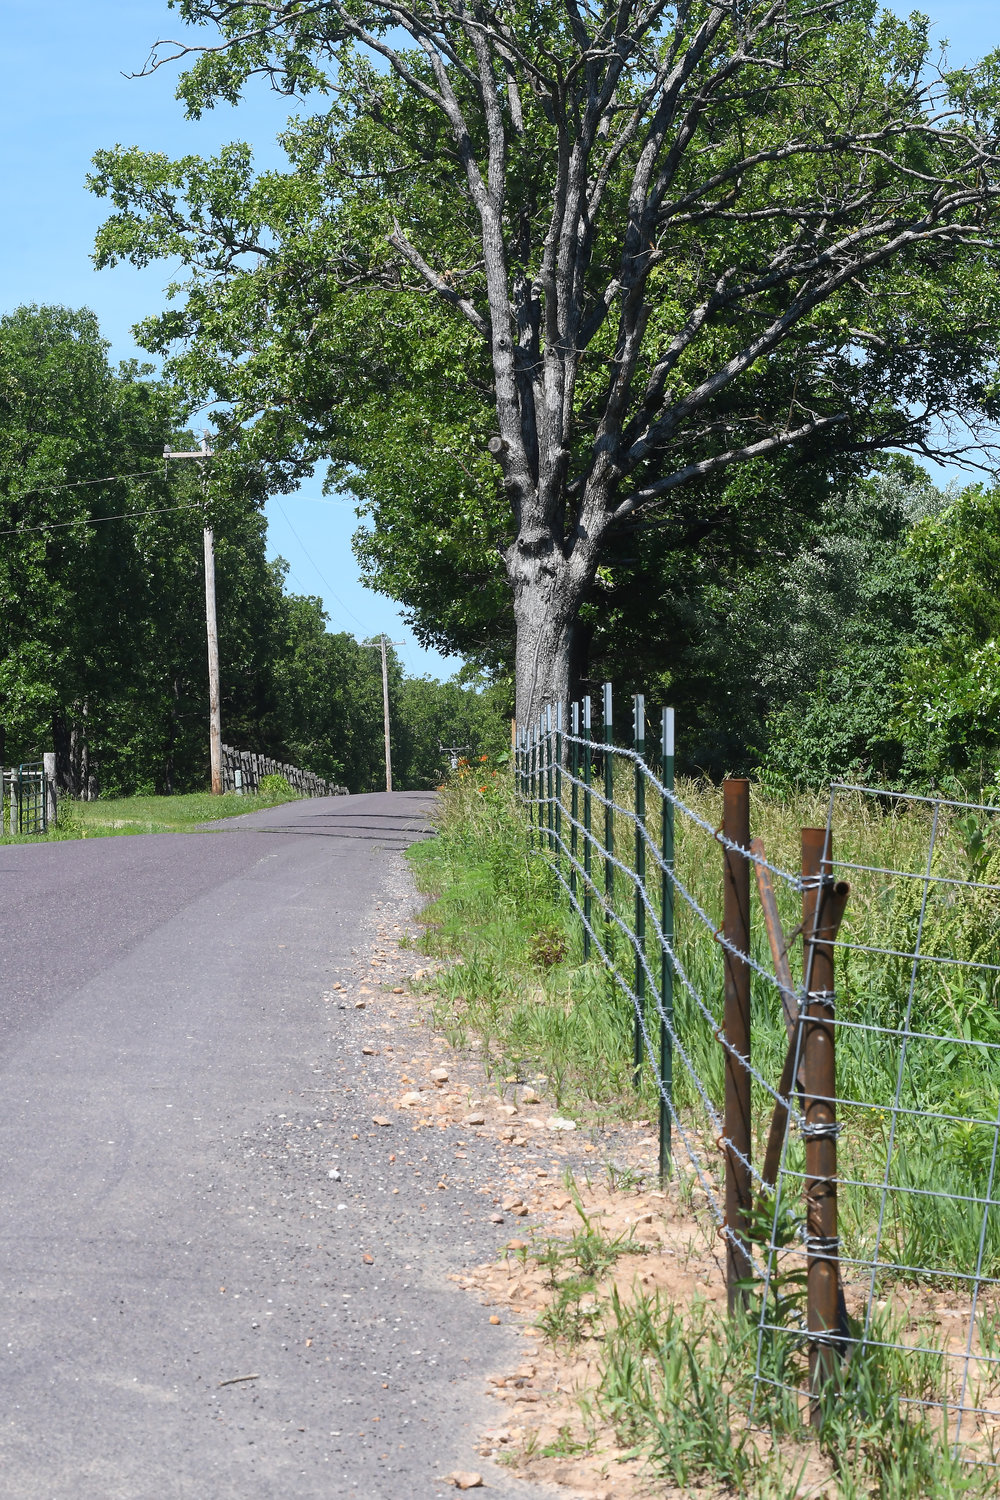 Gasconade County Commissioners intend to have this five-strand barbed-wire fence at the intersection of South Fourth and Price Road removed by county employees if the owners do not remove it themselves. County officials say it was installed on county right-of-way.